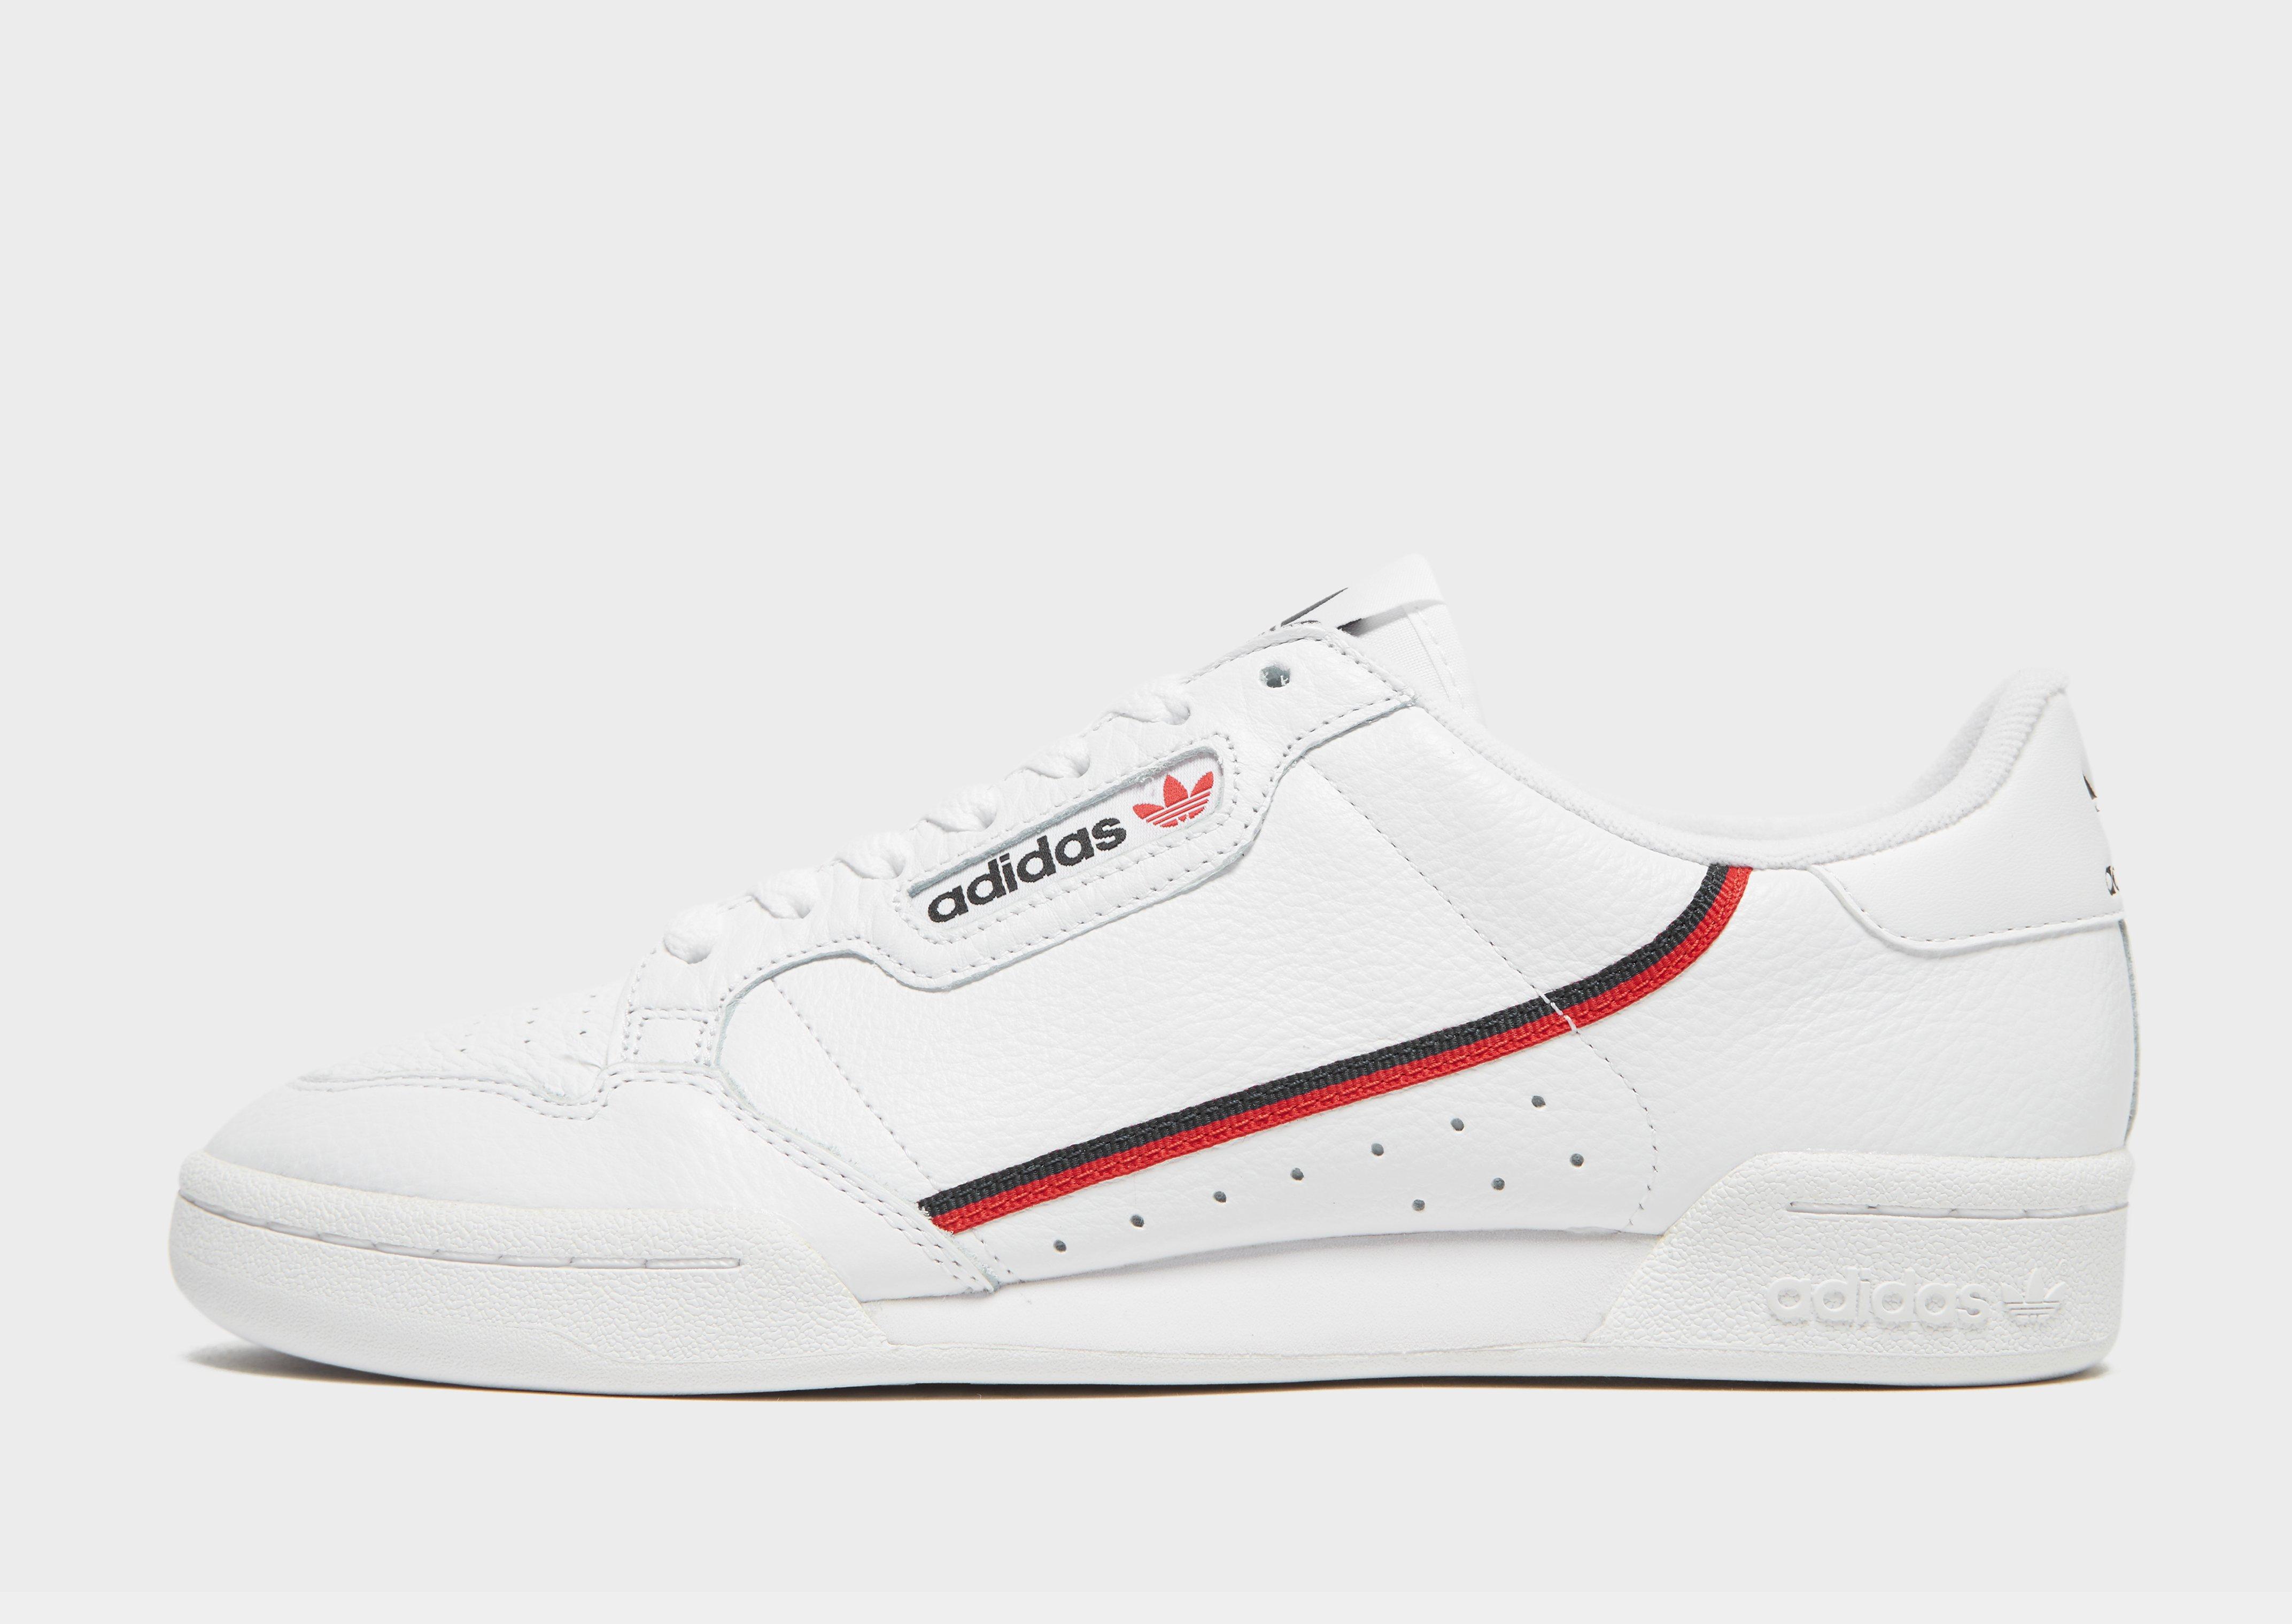 adidas with continental